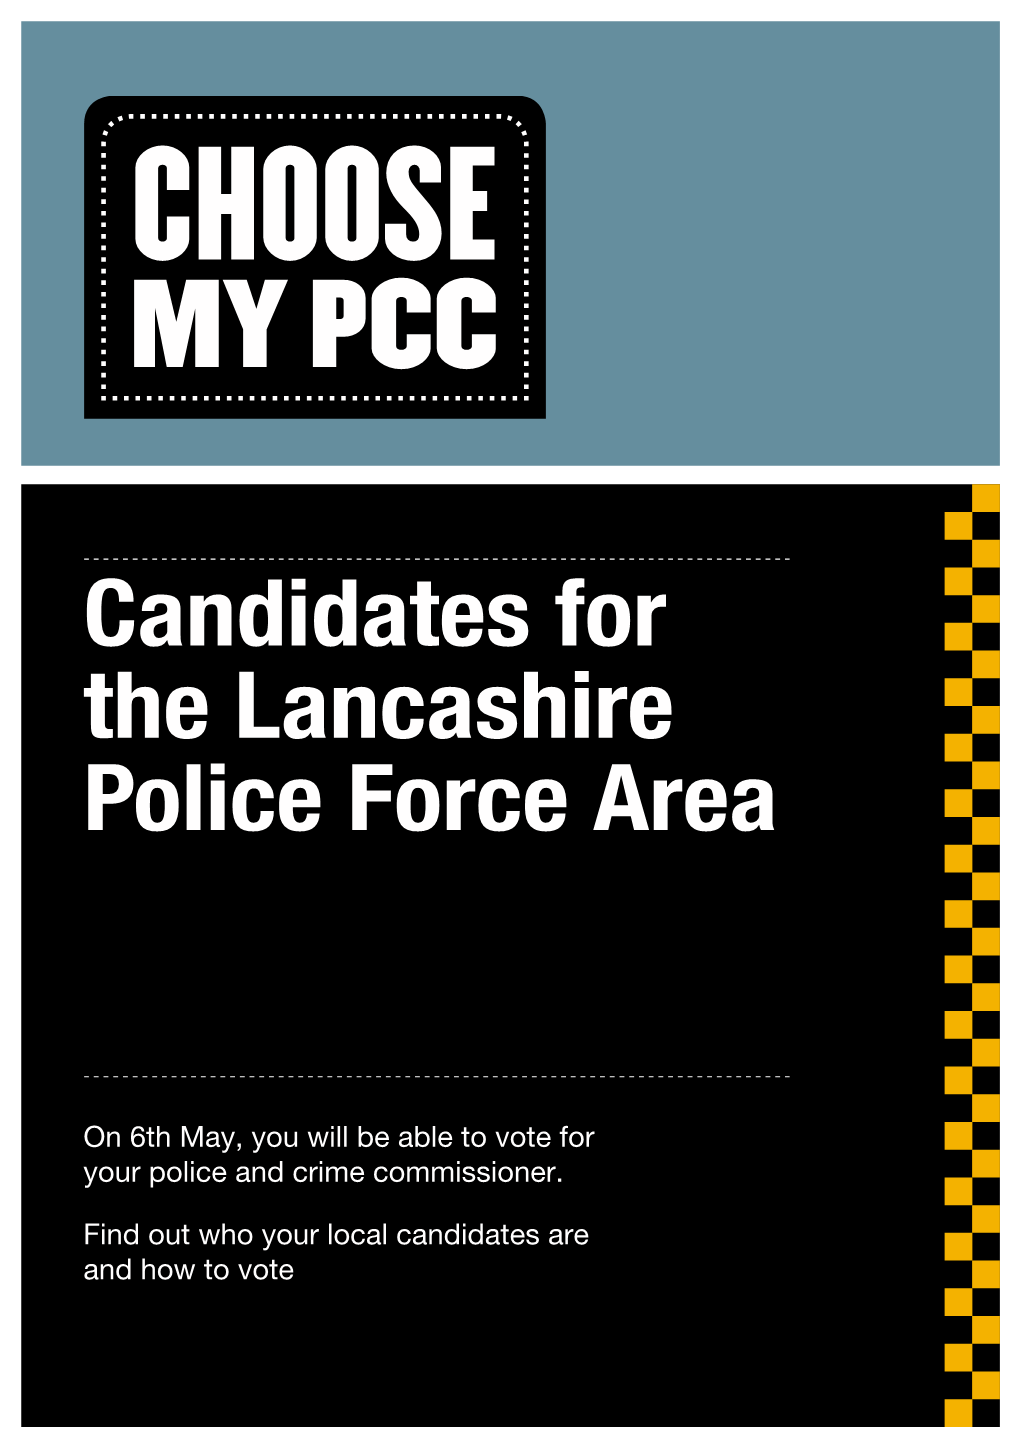 Candidates for the Lancashire Police Force Area